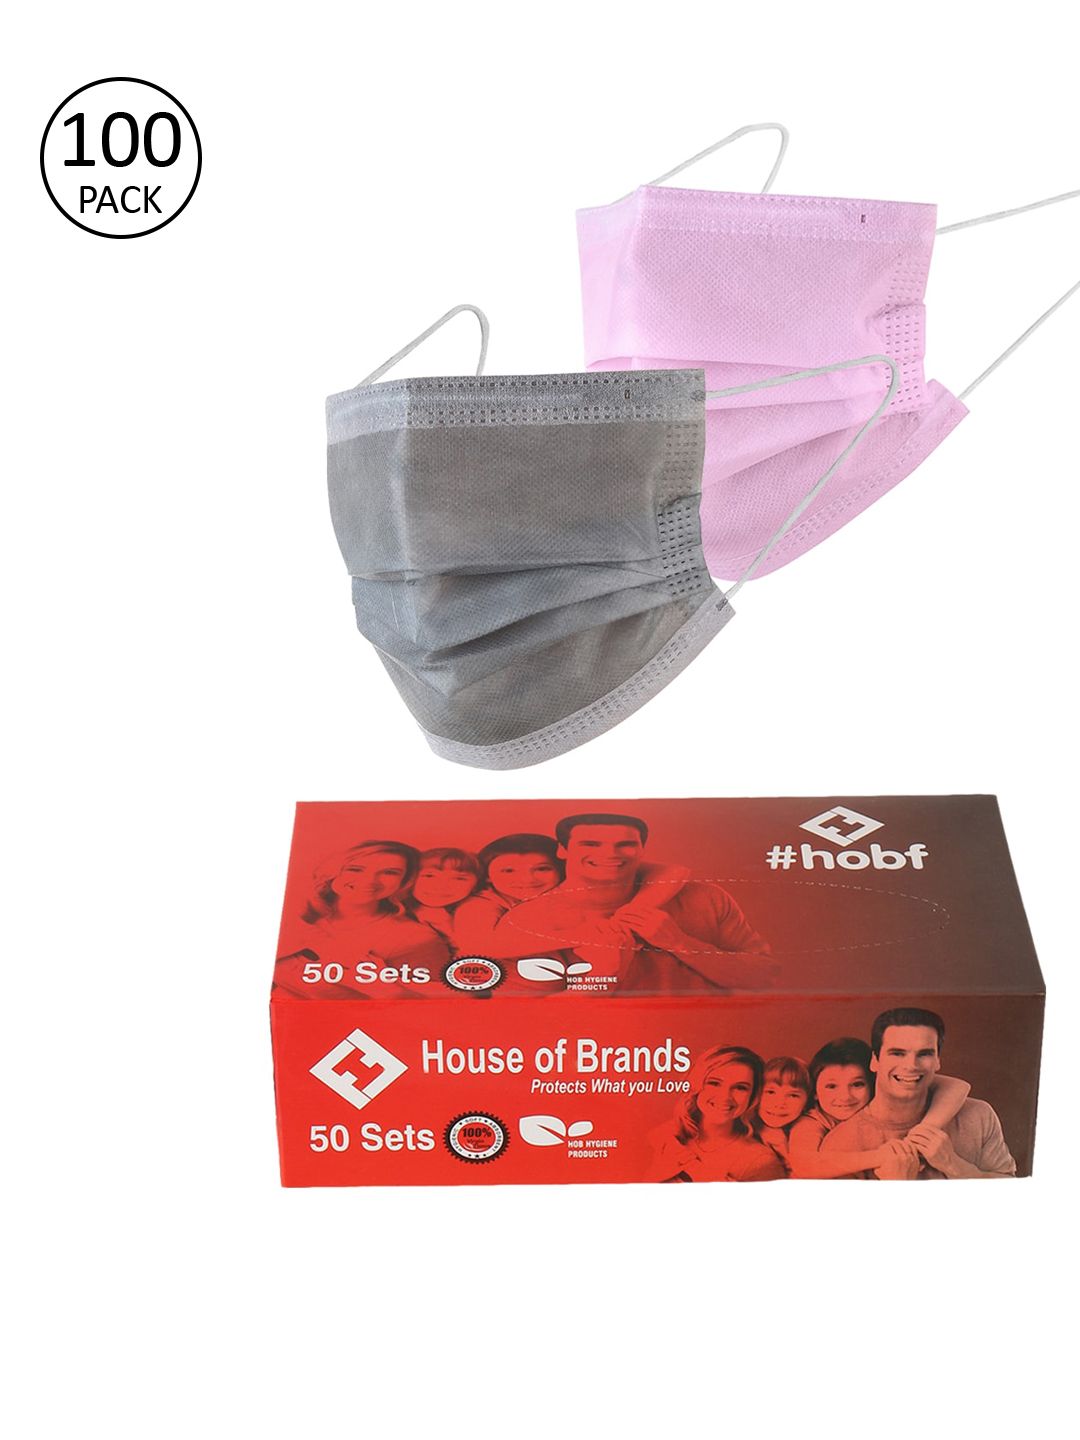 LONDON FASHION hob Unisex Pack Of 100 3-Ply Ultrasonic Anti-Pollution Disposable Masks Price in India